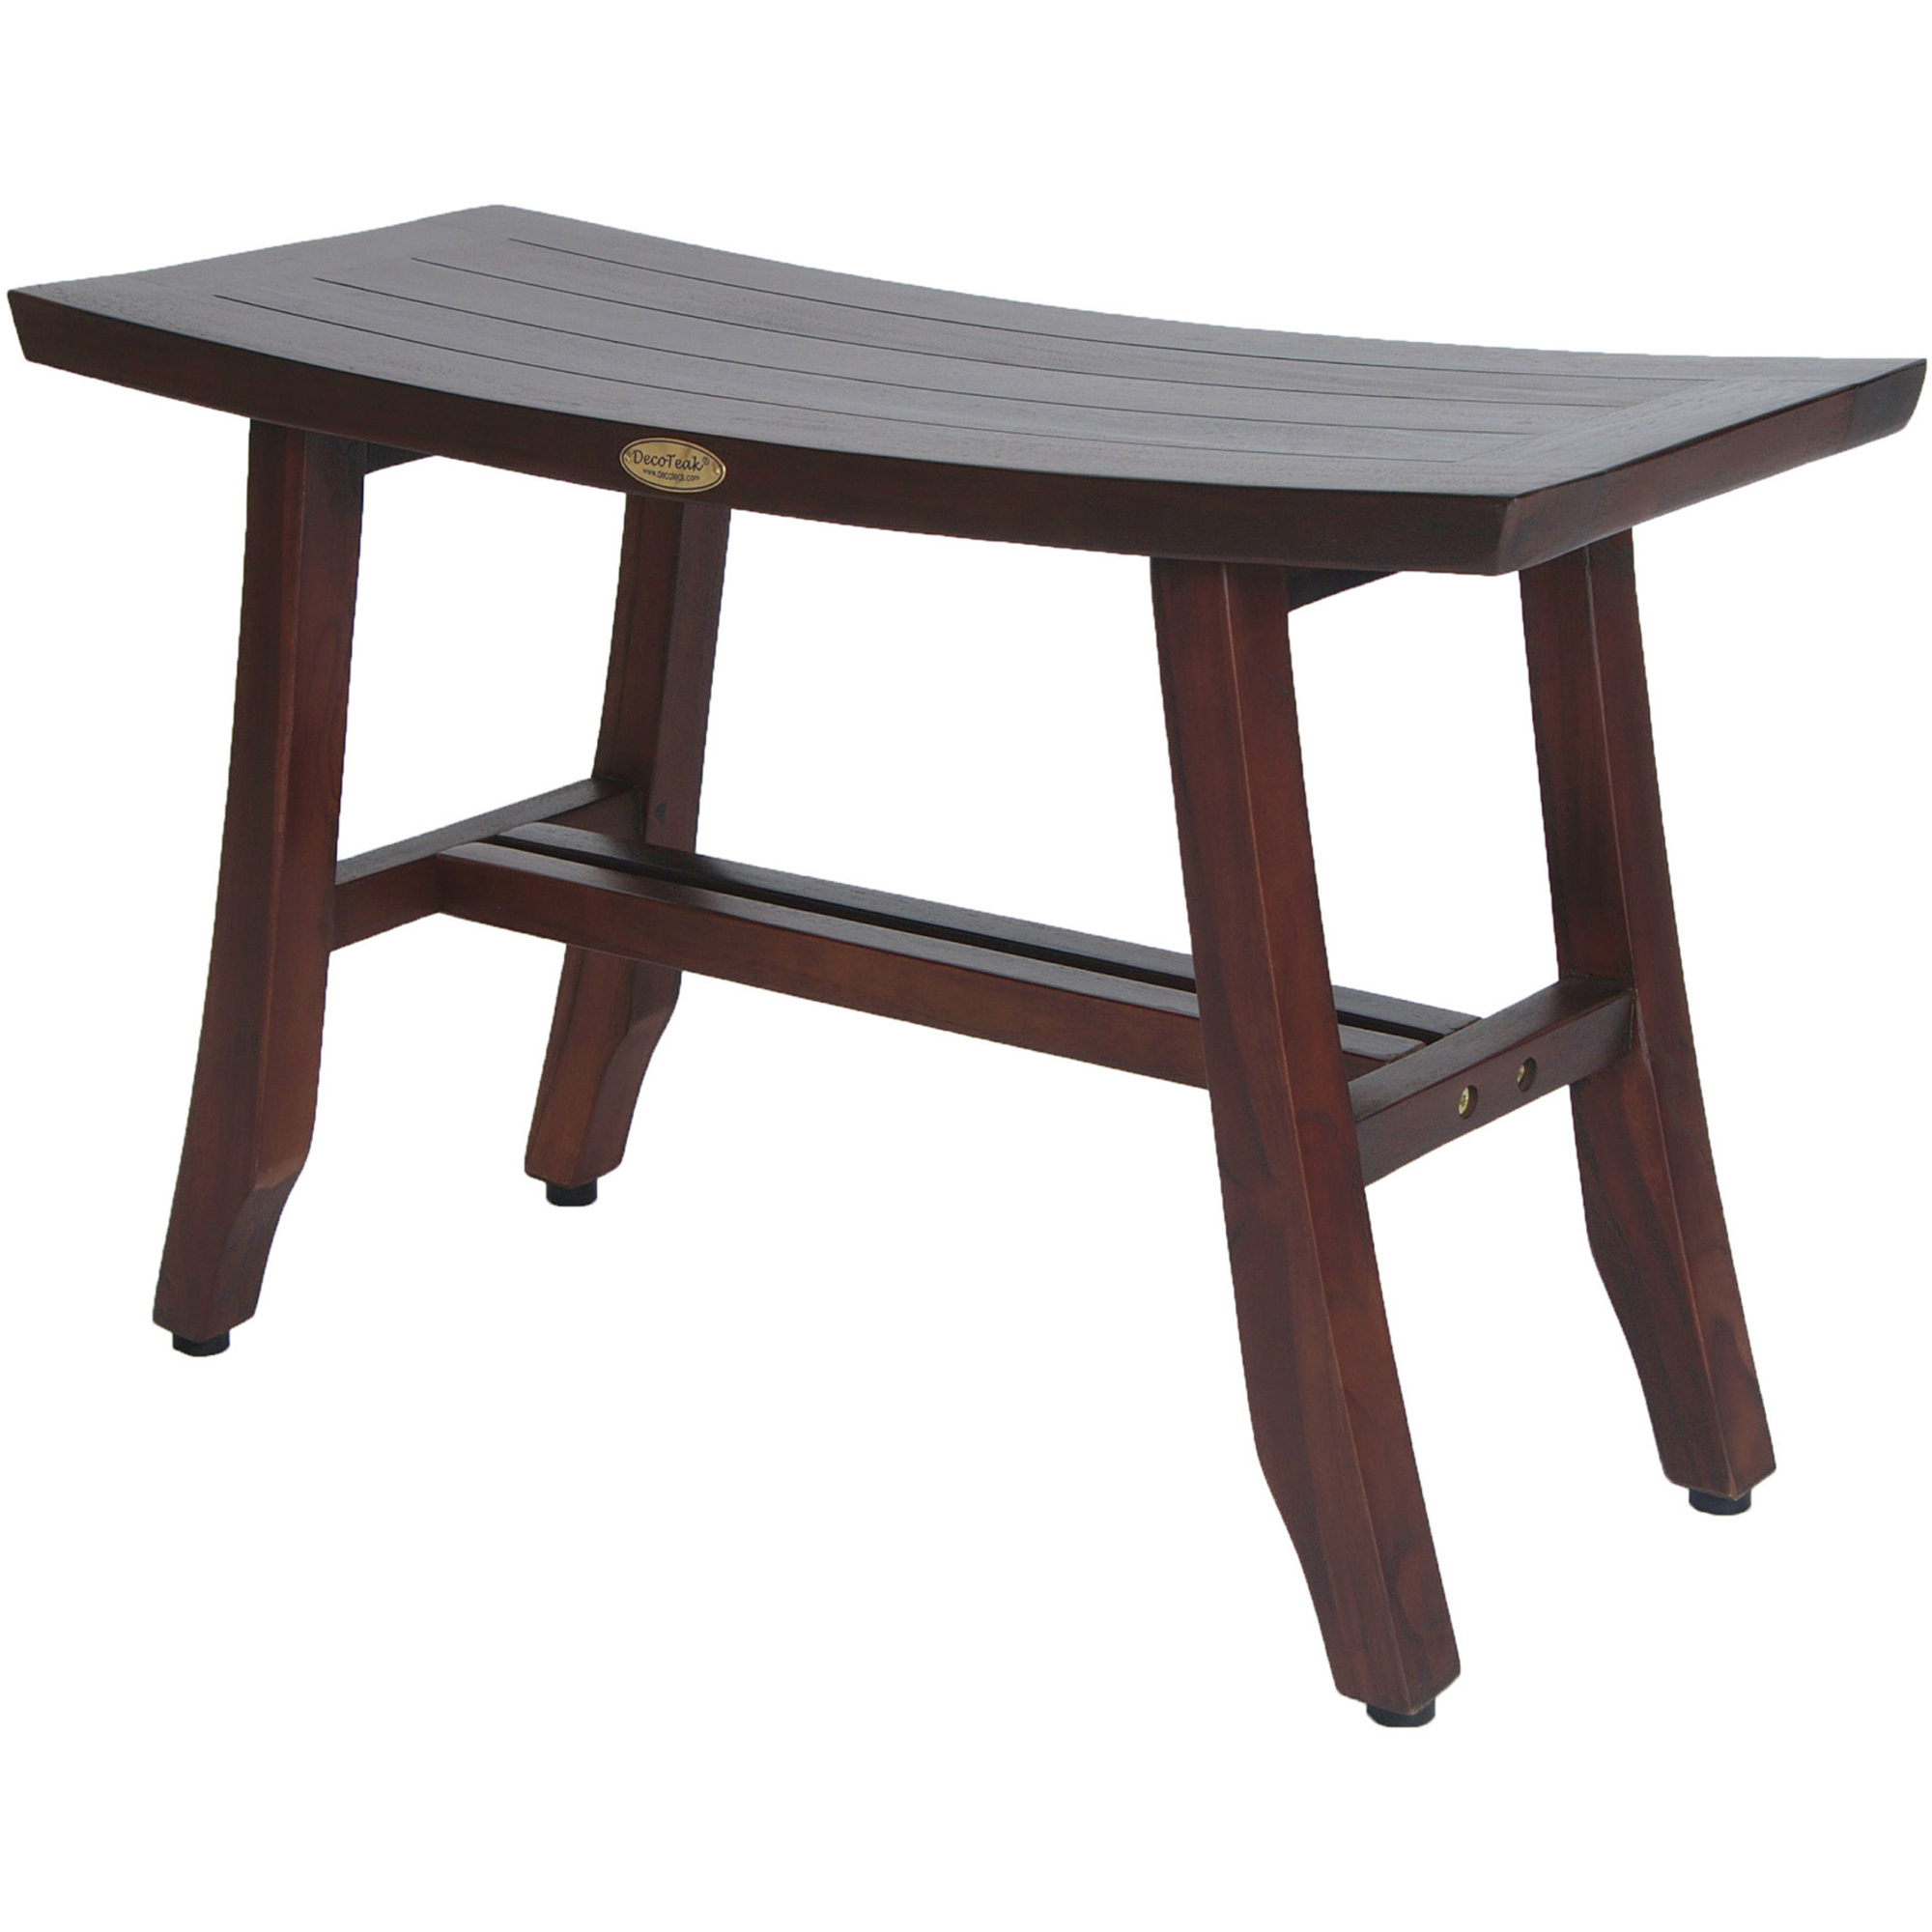 Contemporary Teak Shower Stool or Bench in Brown Finish